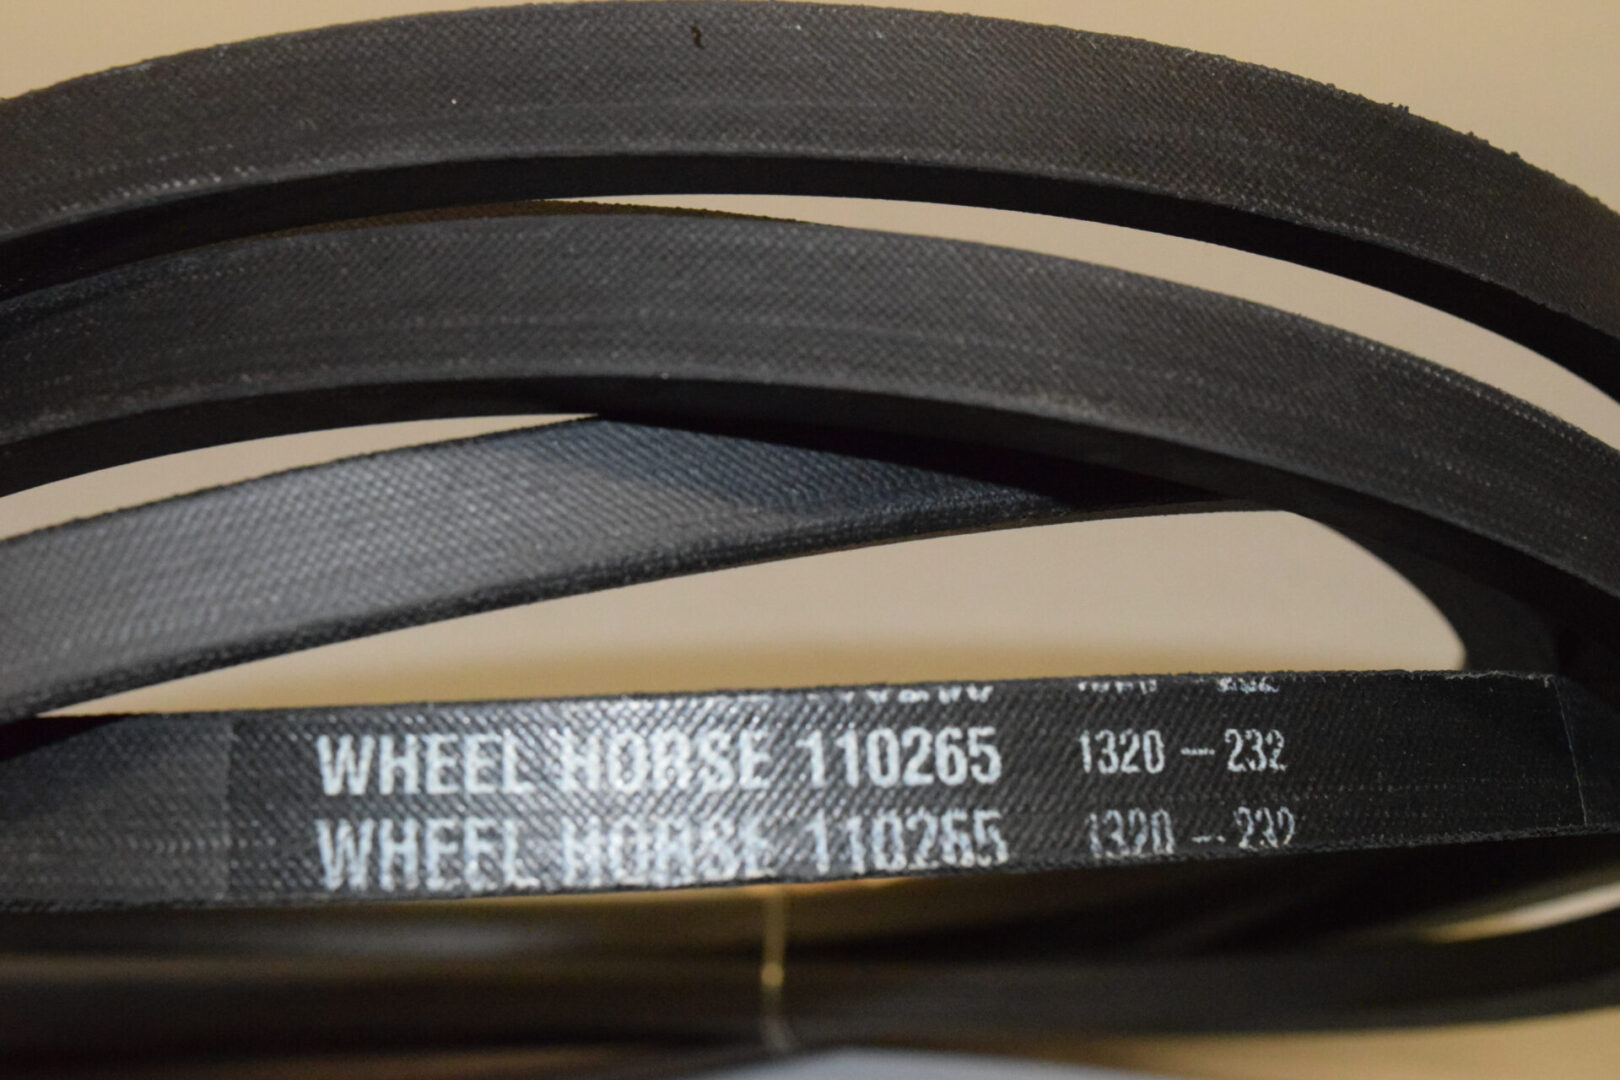 TORO or WHEEL HORSE 1569 made with Kevlar Replacement Belt 